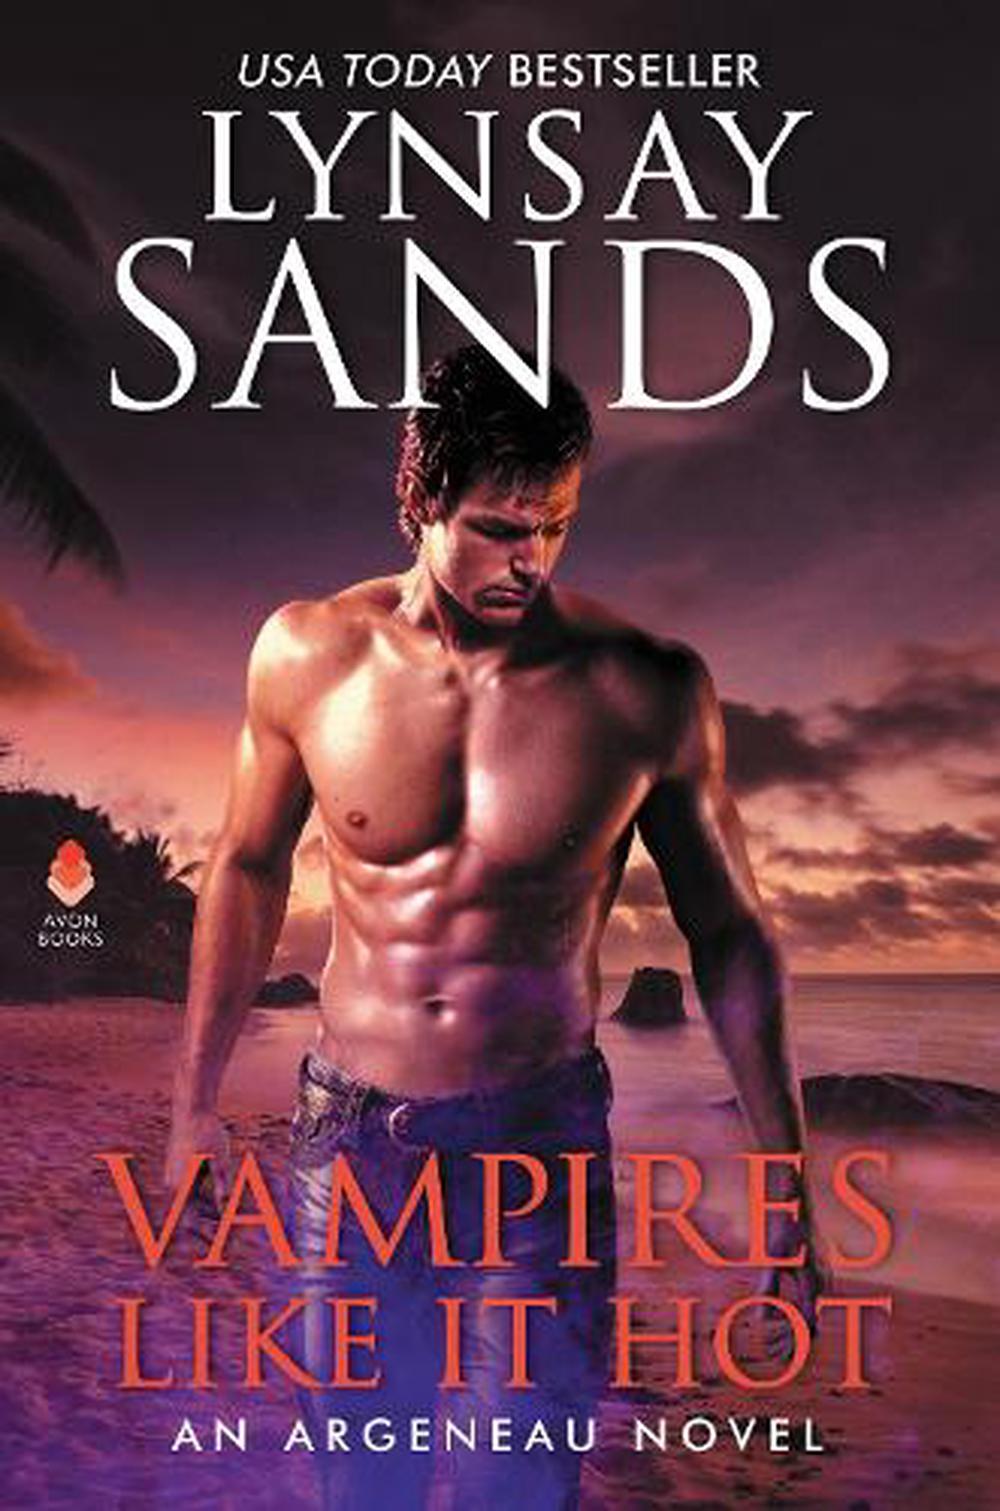 Vampire Most Wanted by Lynsay Sands